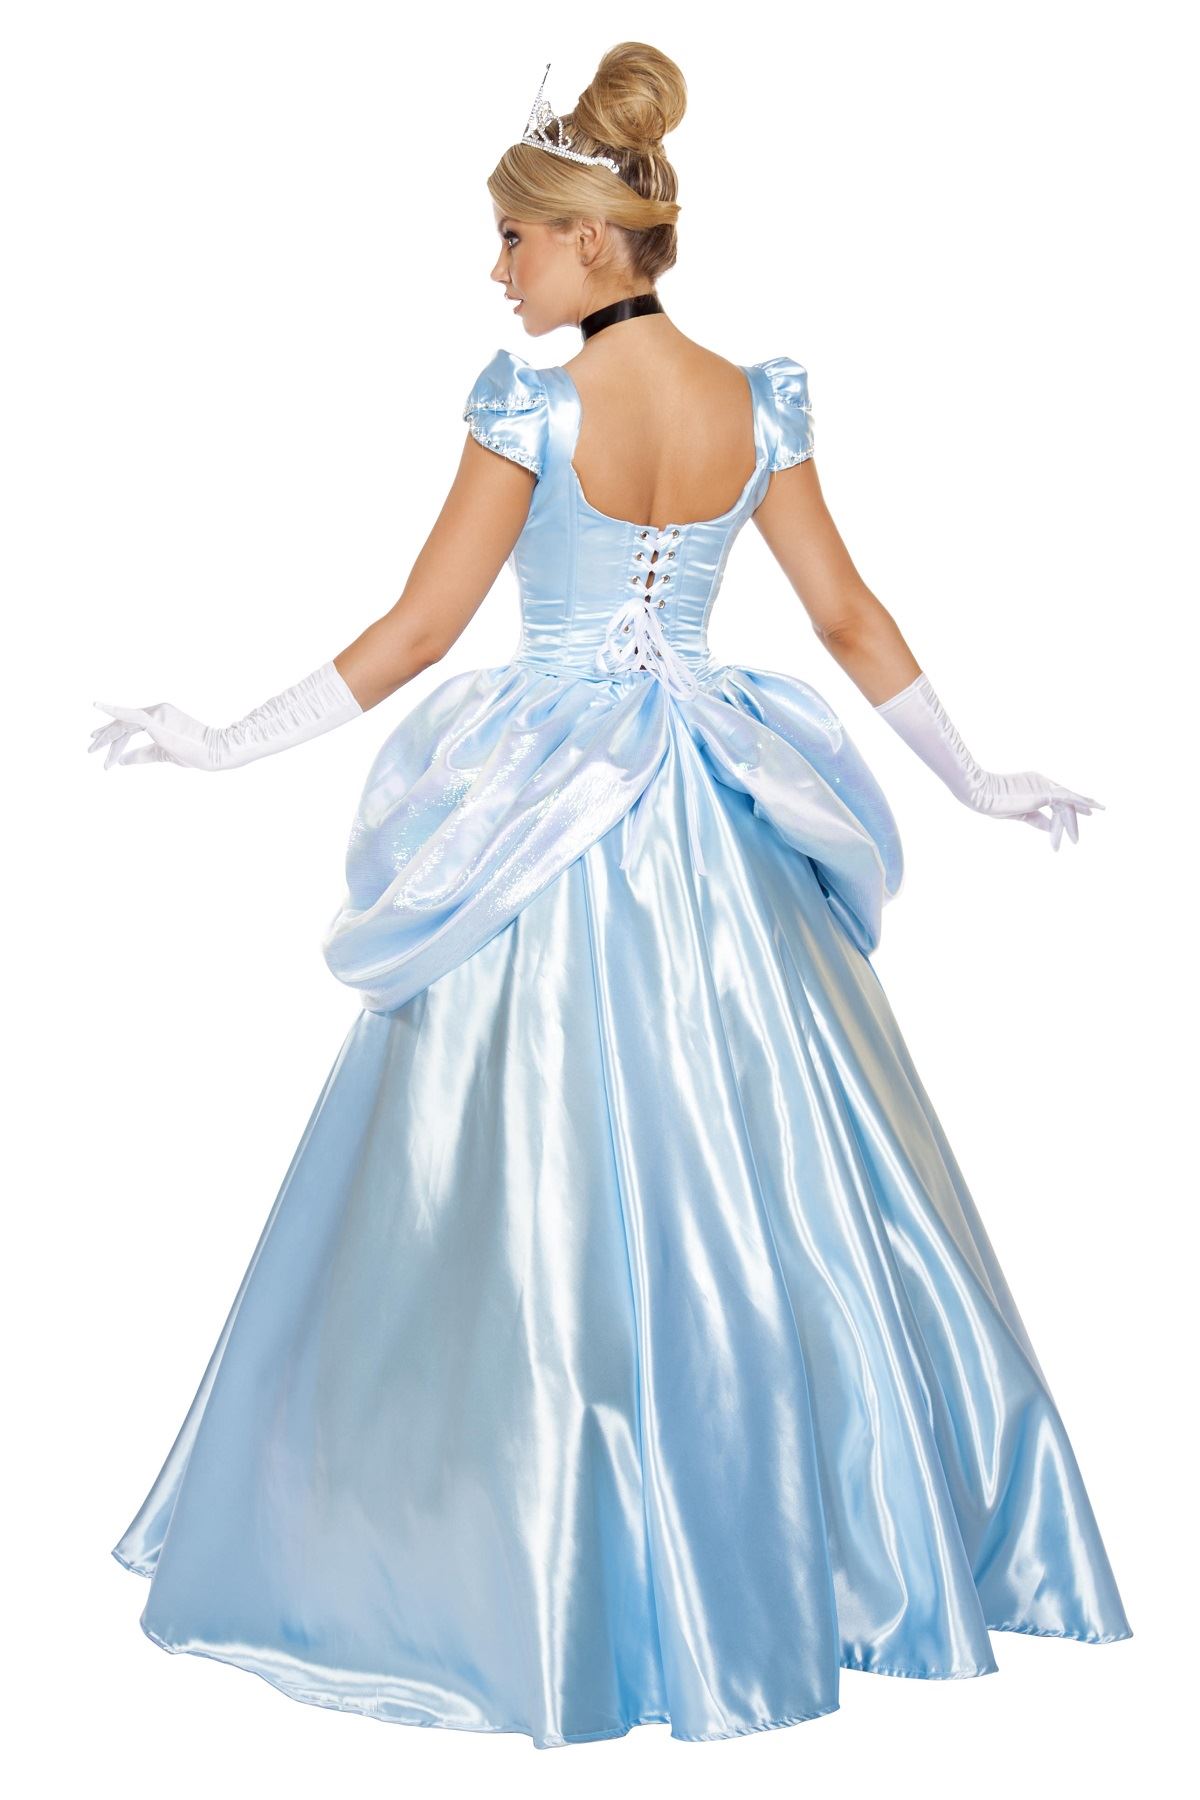 Adult Midnight Deluxe Princess Woman Costume | $178.99 | The Costume Land